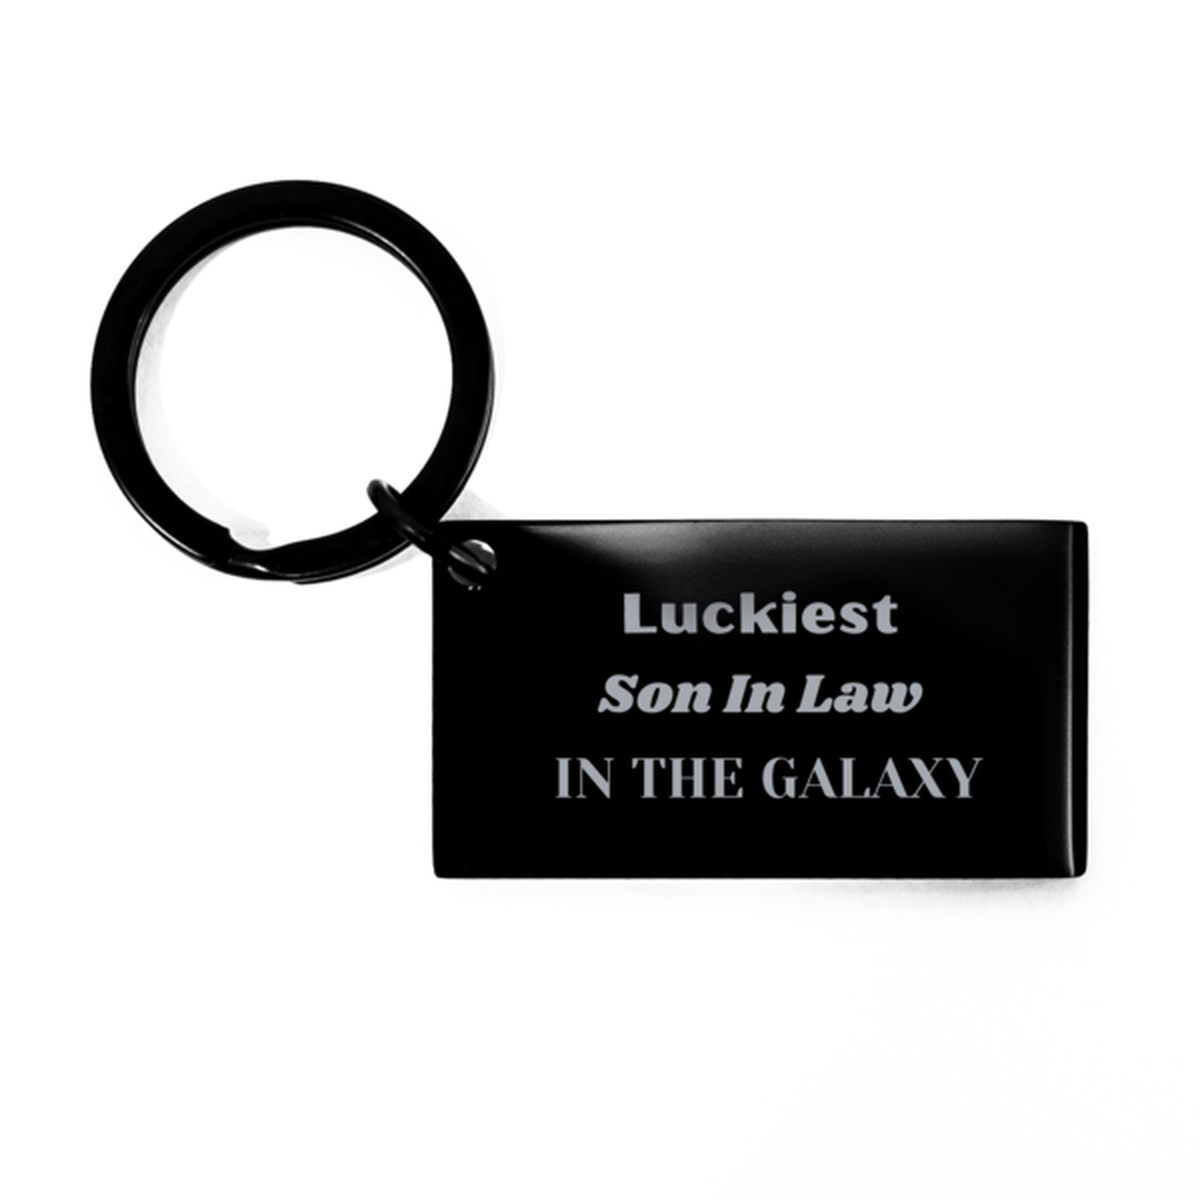 Luckiest Son In Law in the Galaxy, To My Son In Law Engraved Gifts, Christmas Son In Law Keychain Gifts, X-mas Birthday Unique Gifts For Son In Law Men Women